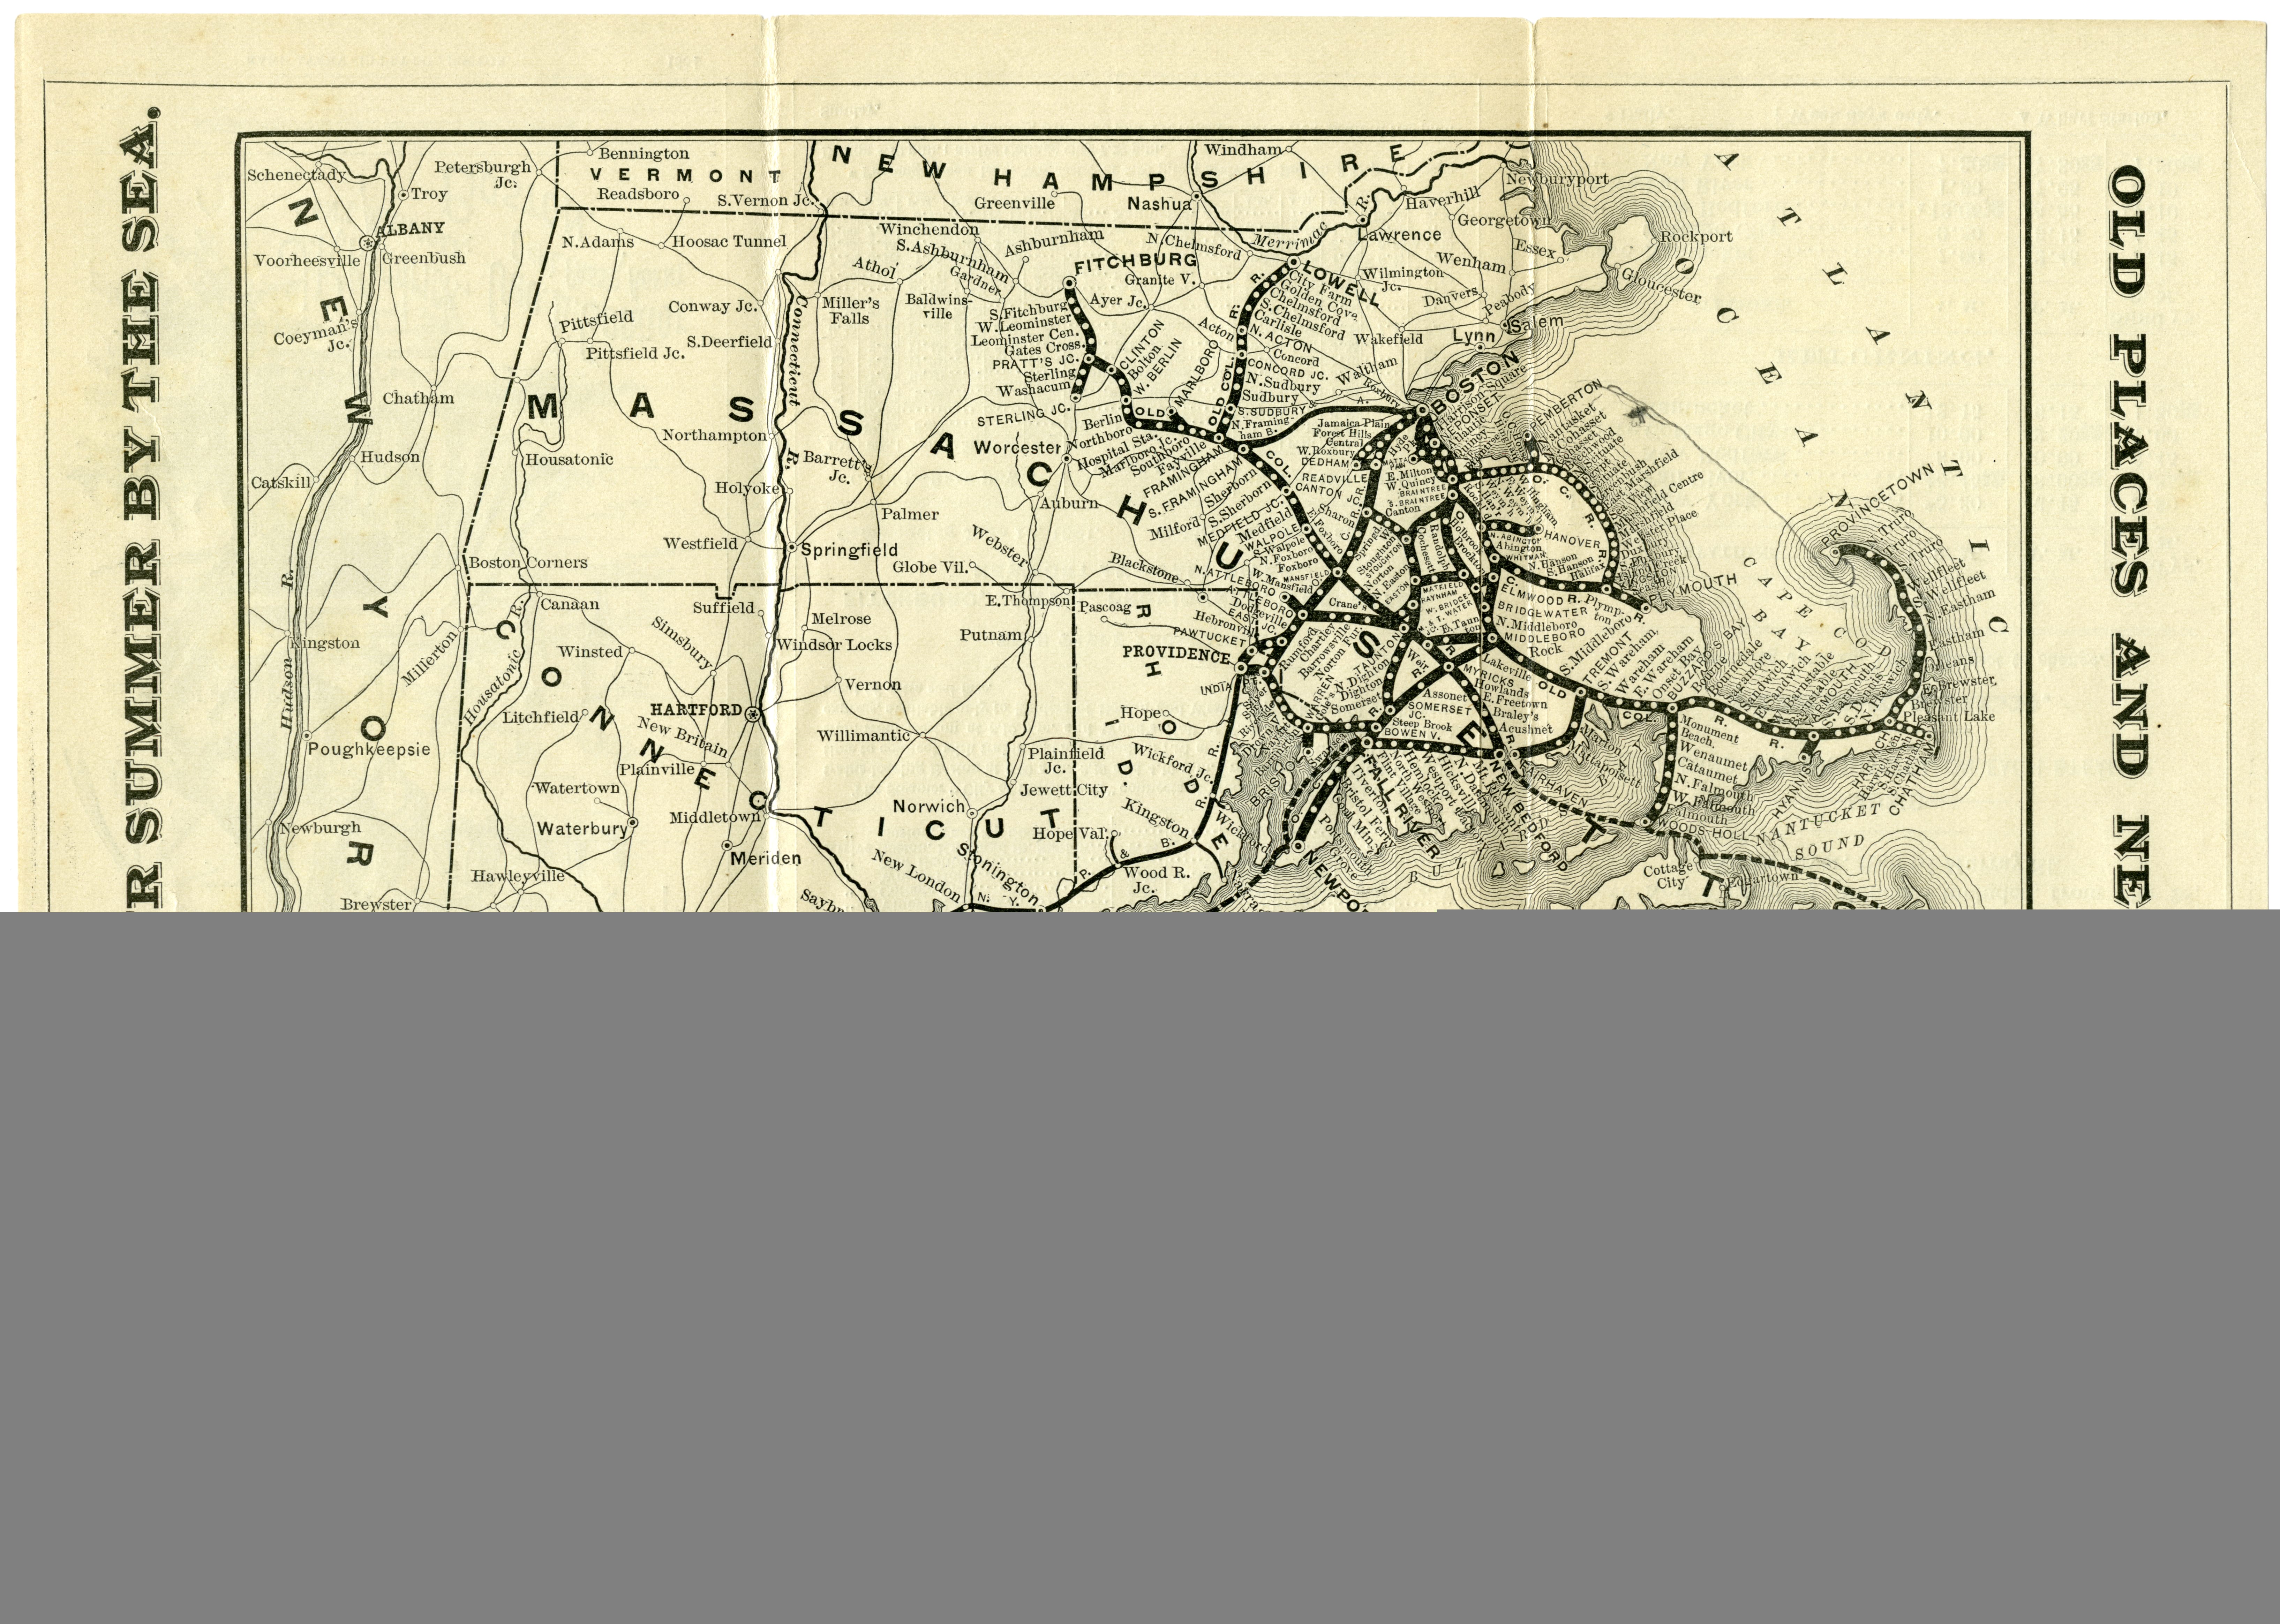 Image of Old Colony Railroad Timetable Map